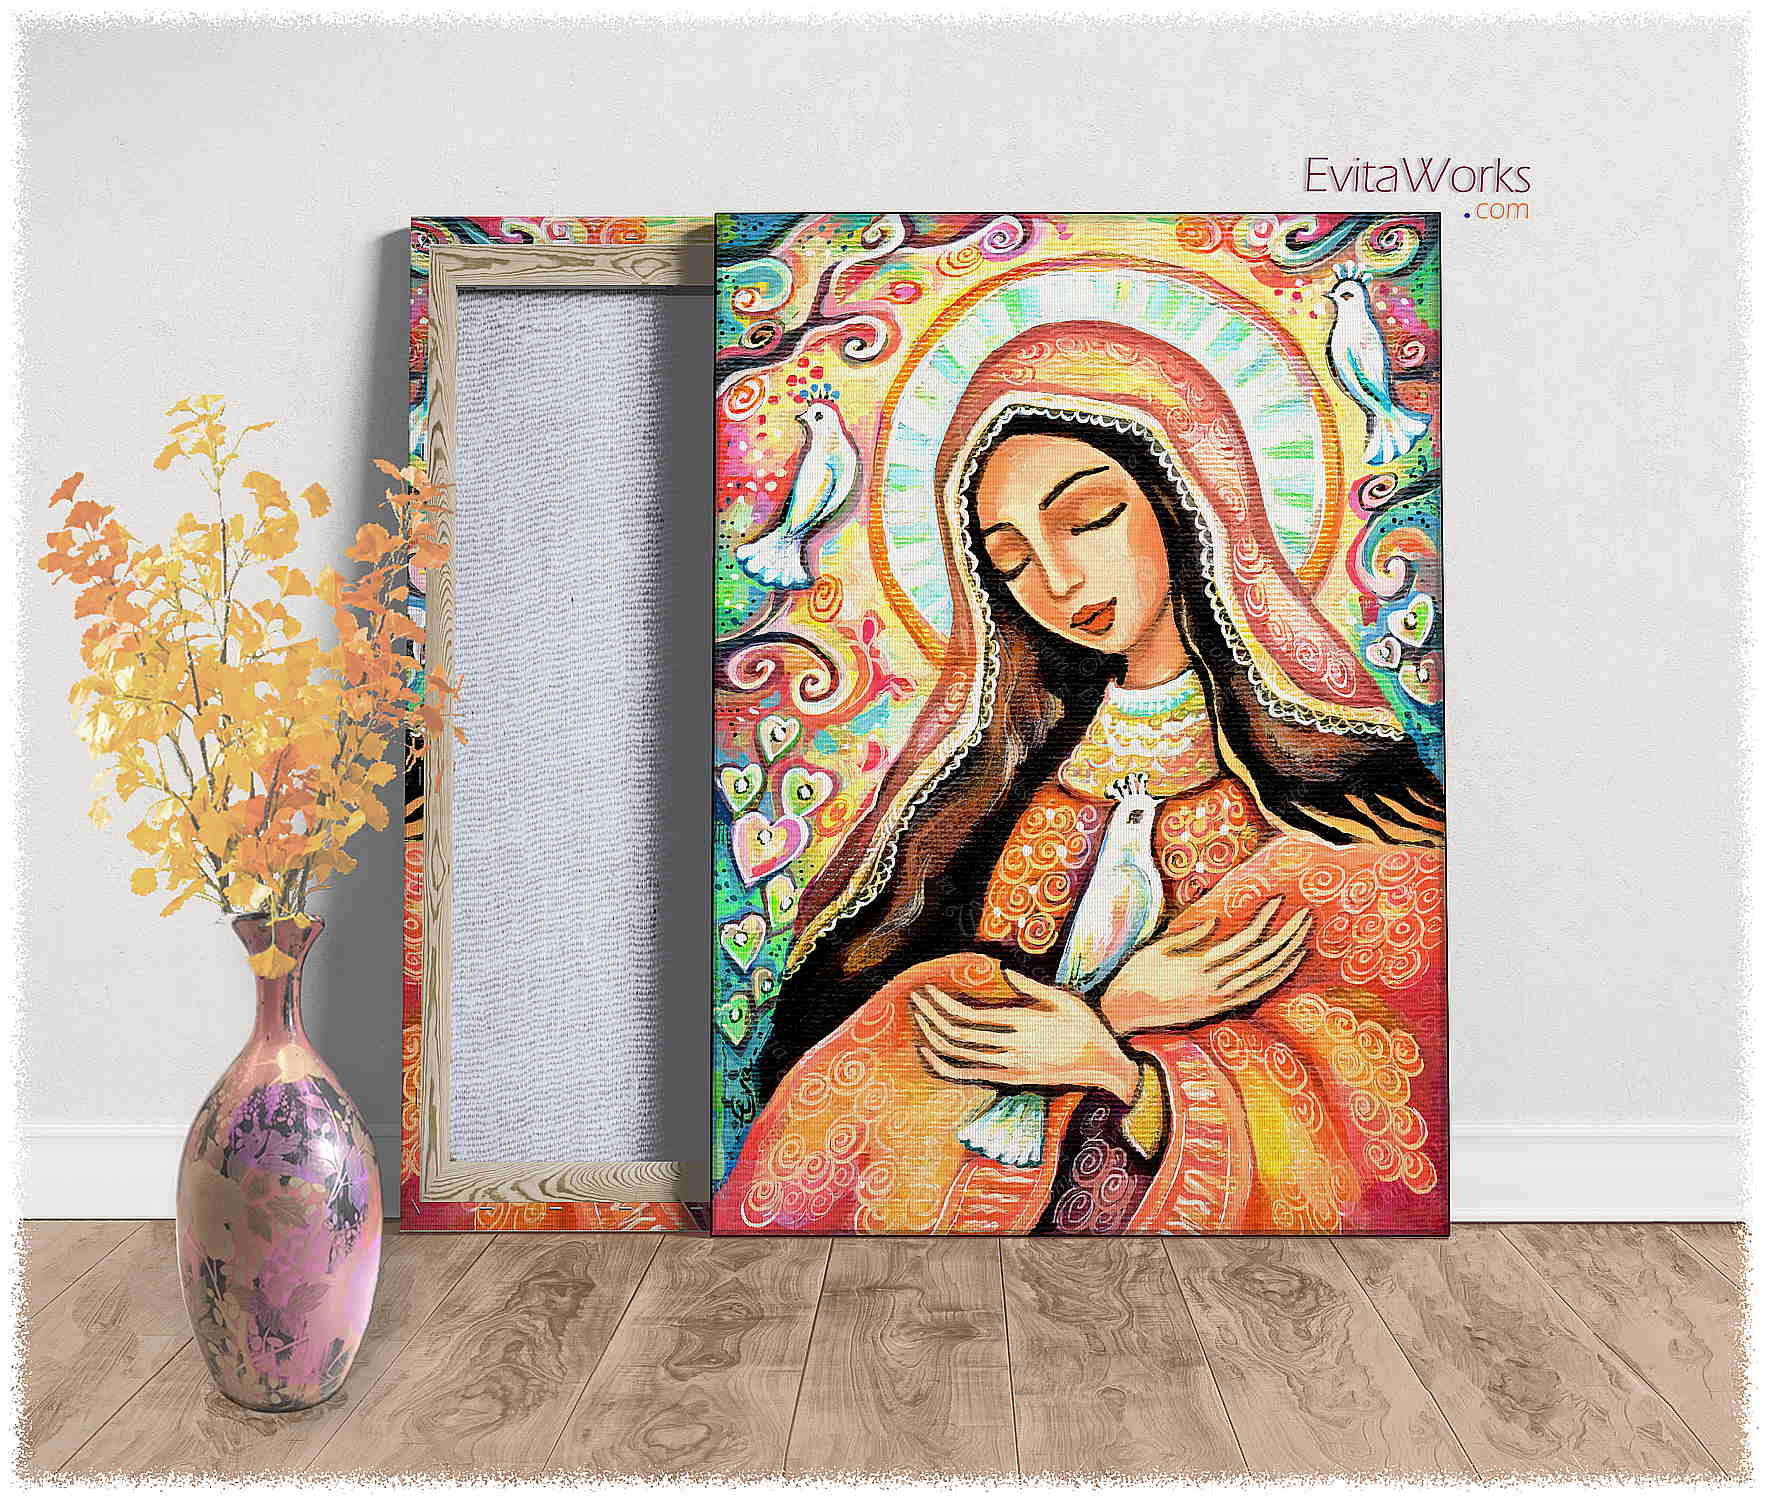 Hit to learn about "The Prayer of Mary, holy woman" on canvases